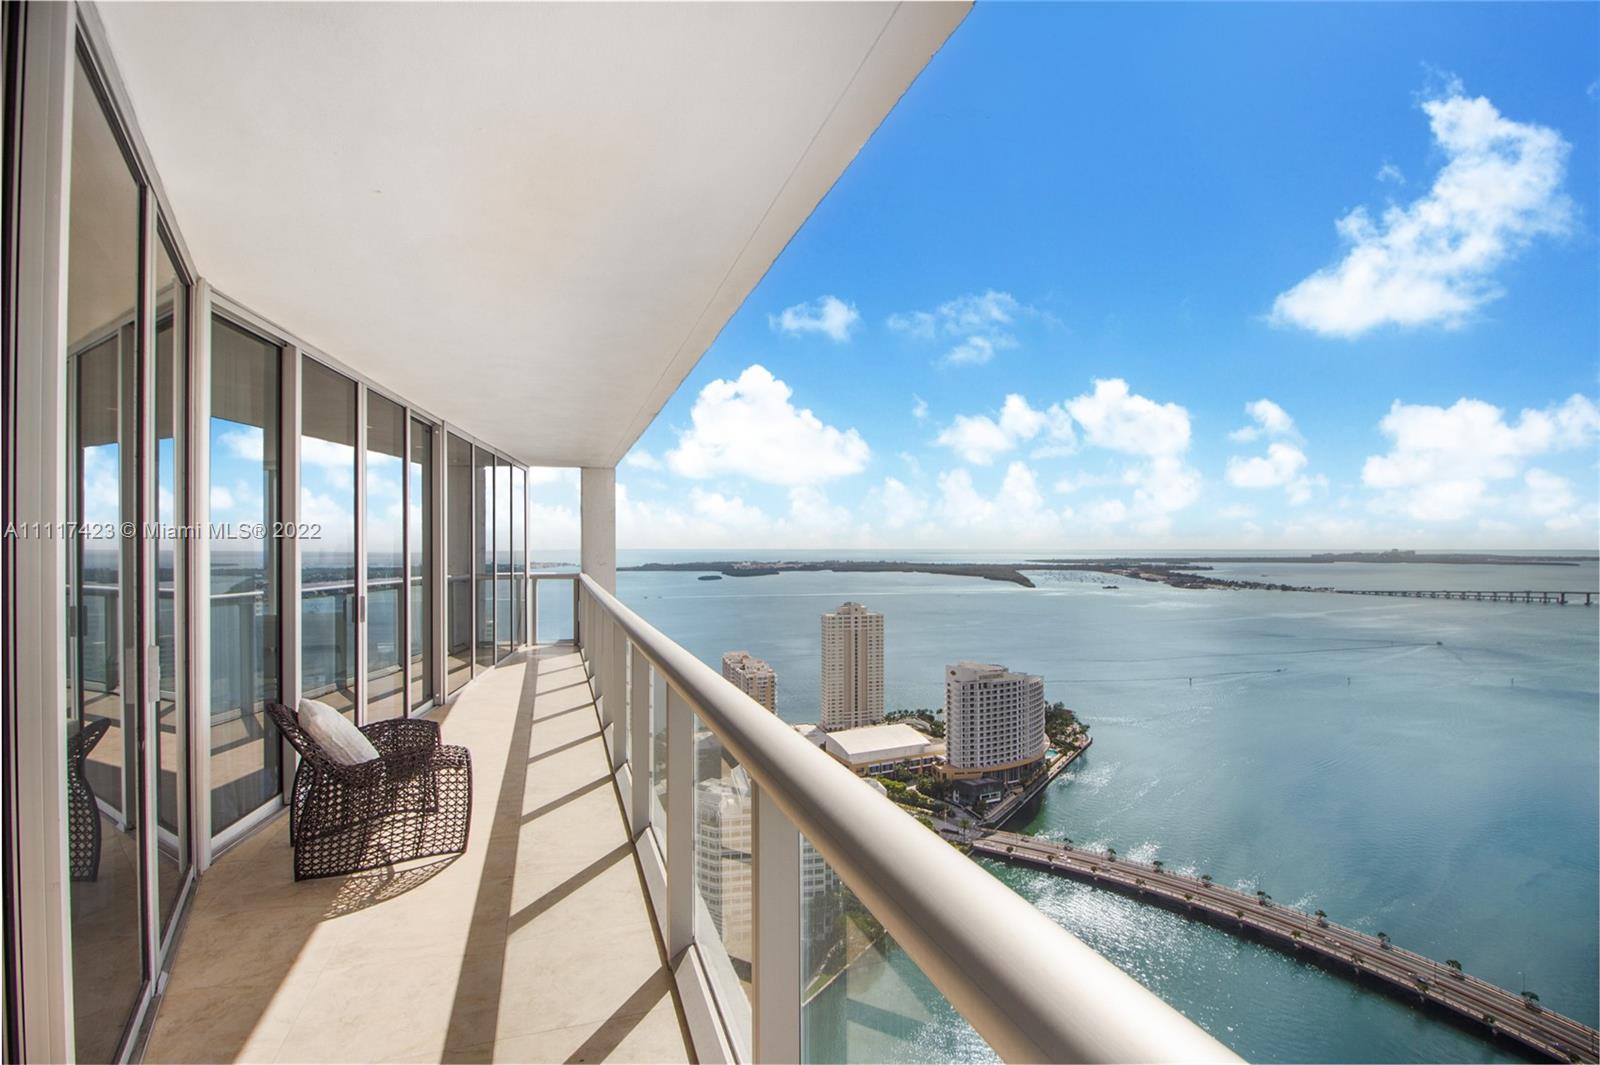 Step into this completely remodeled 3 Bed/2 Bath corner unit at Icon Brickell Tower 2. Featuring brand new floors, new marble kitchen counters, remodeled bathrooms and breathtaking views! Icon Brickell offers 5 star amenities ranging from a luxury spa, infinity pool, state of the art fitness center and more. This is the best line in the building, high floor with panoramic views, tastefully remodeled and ready to be called home. Bring your pickiest buyer.